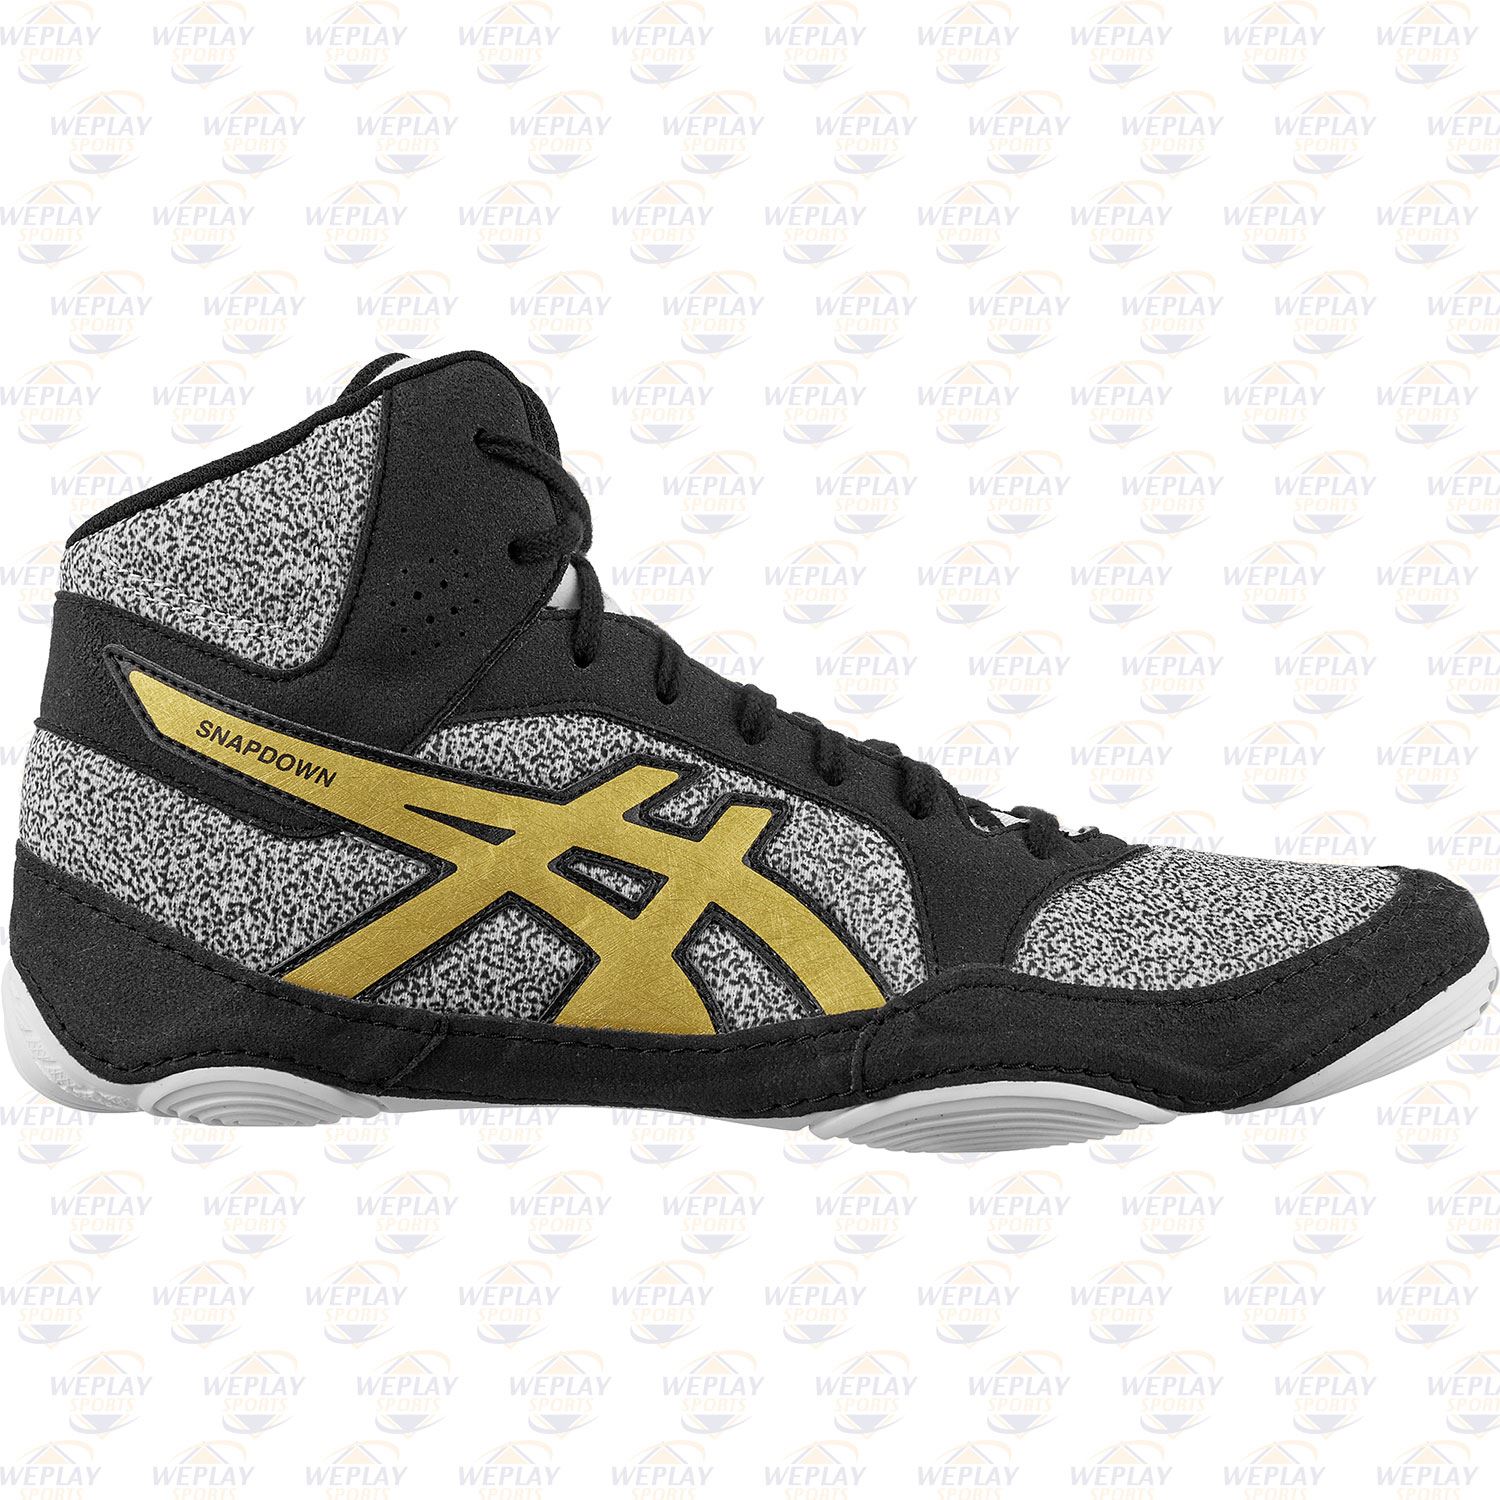 snapdown wrestling shoes